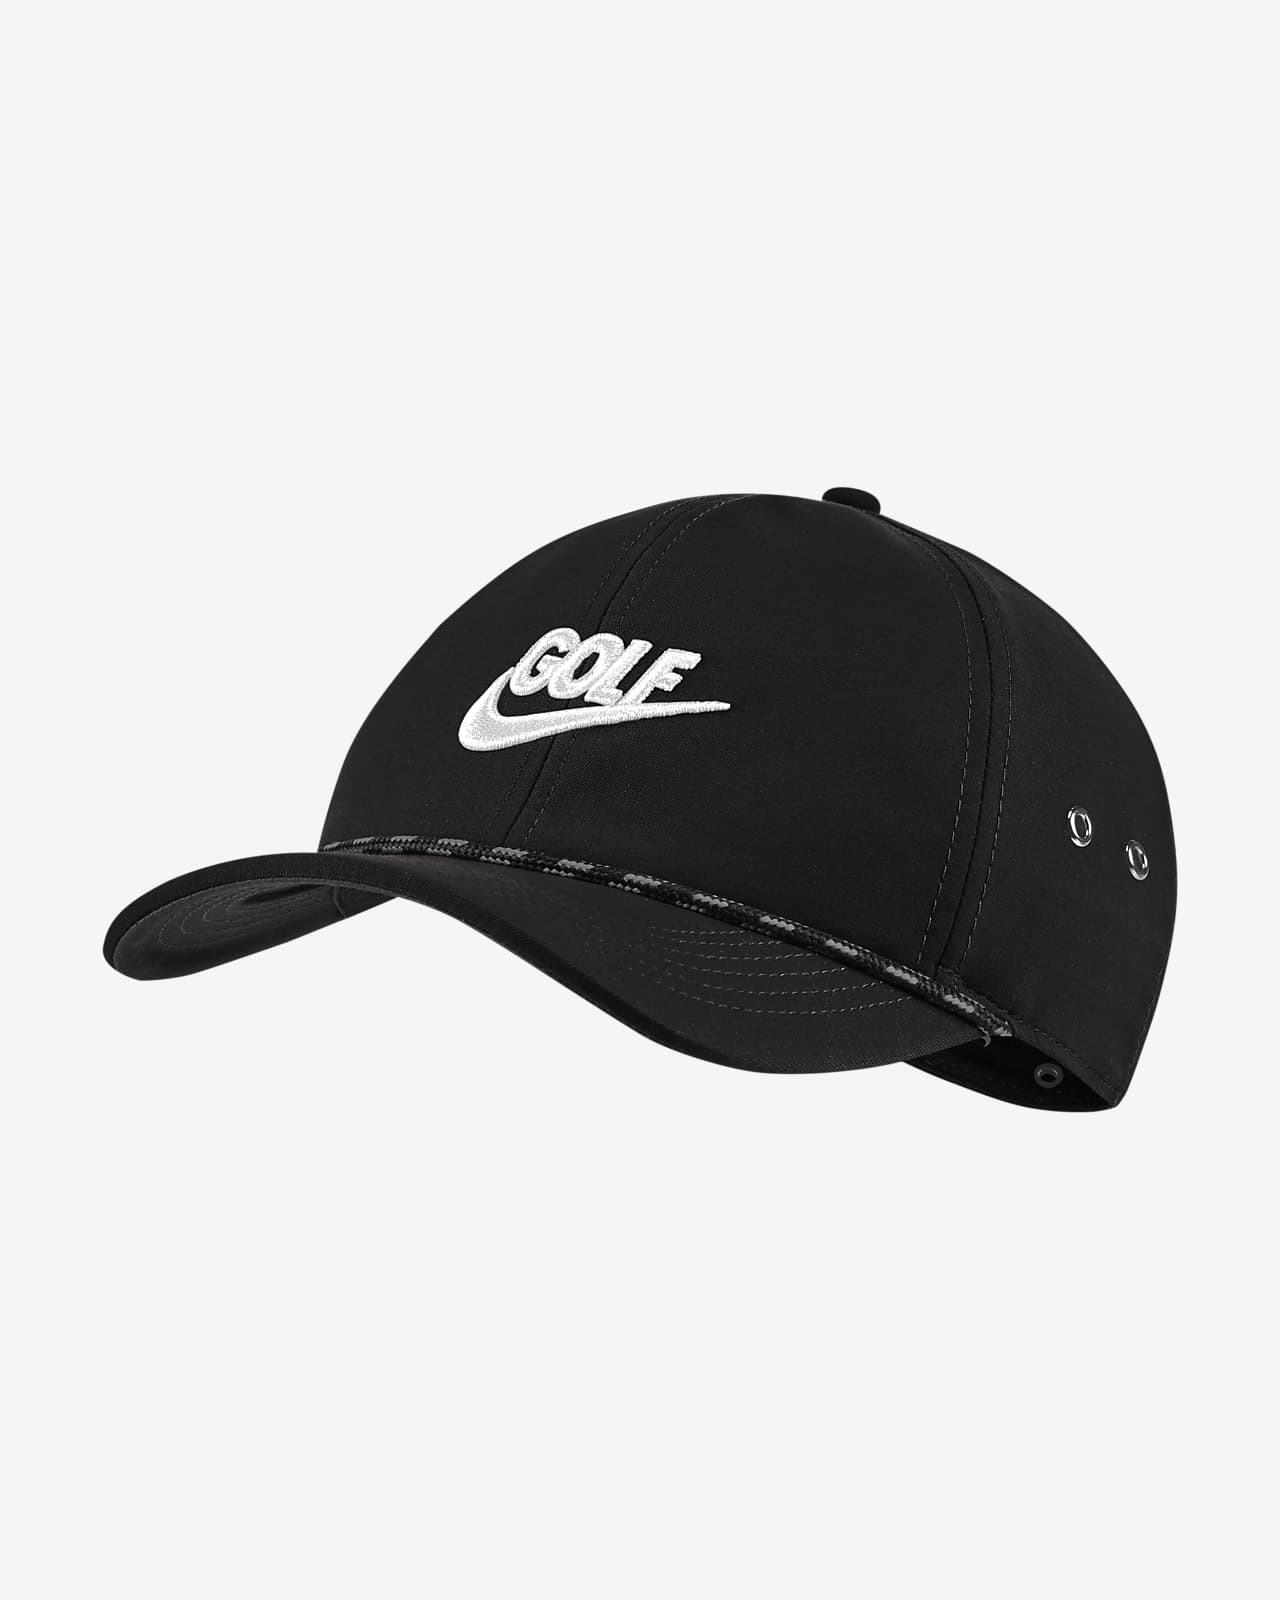 Nike Golf Aerobill Classic99 Performance Fitted Hat - Black